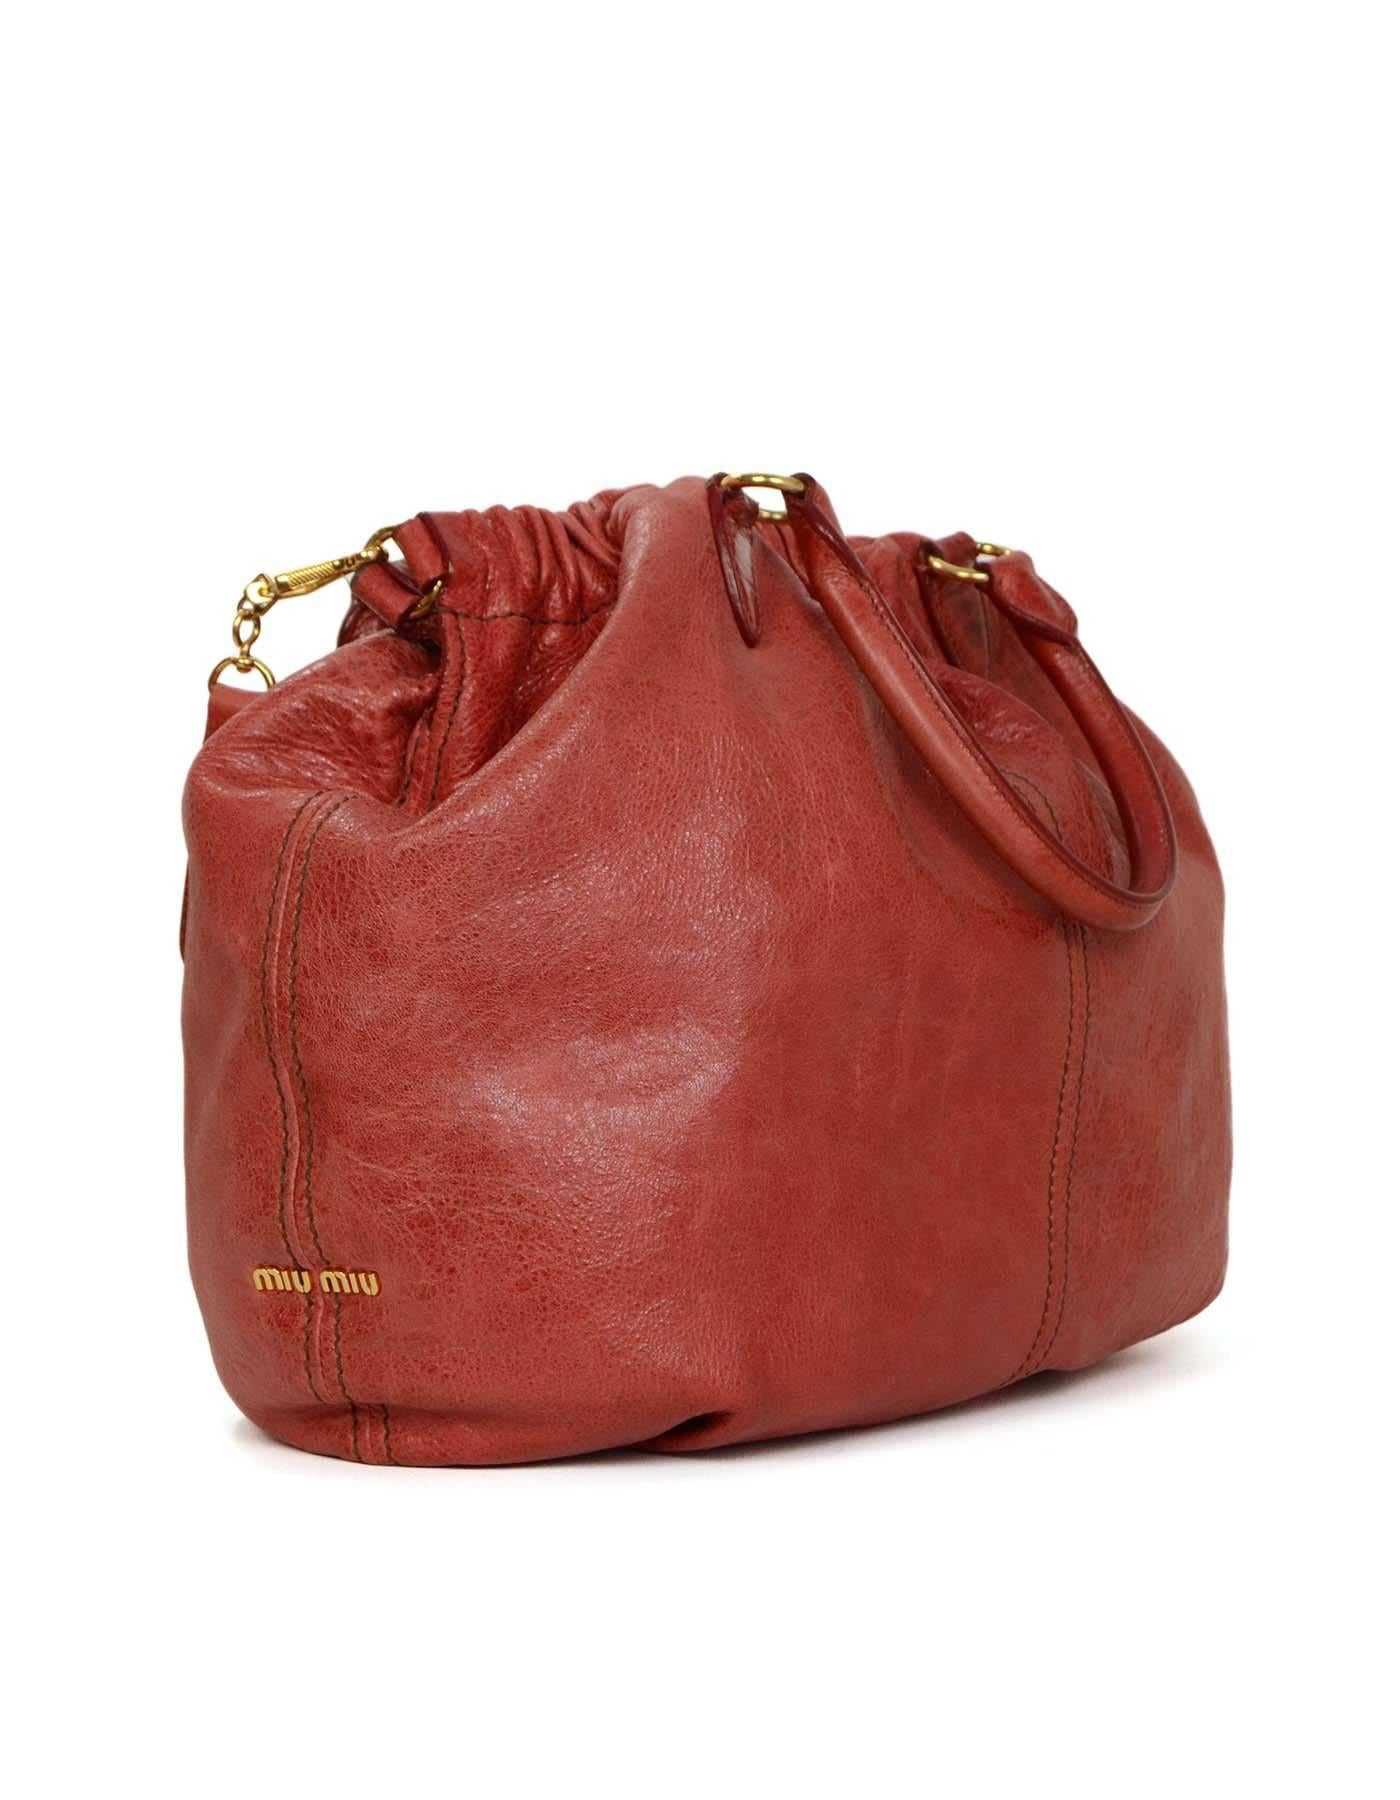 Miu Miu Red Distressed Leather Hobo Bag  
Features optional crossbody strap
Made In: Italy
Color: Red
Hardware: Goldtone
Materials: Distressed leather
Lining: Brown canvas
Closure/Opening: Open top with center magnetic snap closure
Exterior